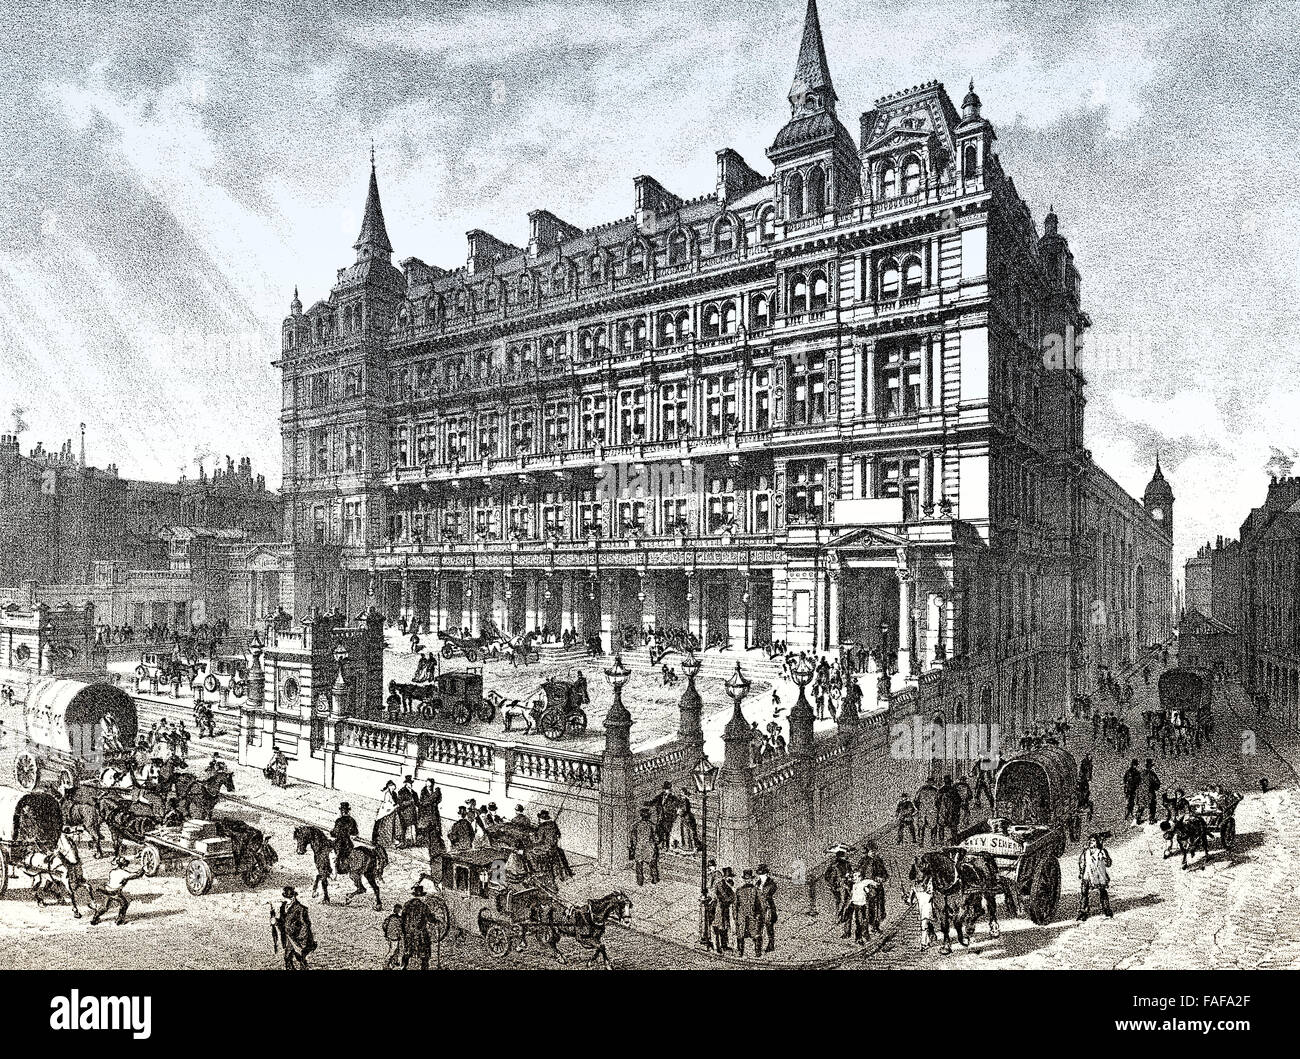 London Cannon Street, a central London railway terminus, Front of original station building, 19th century, Stock Photo